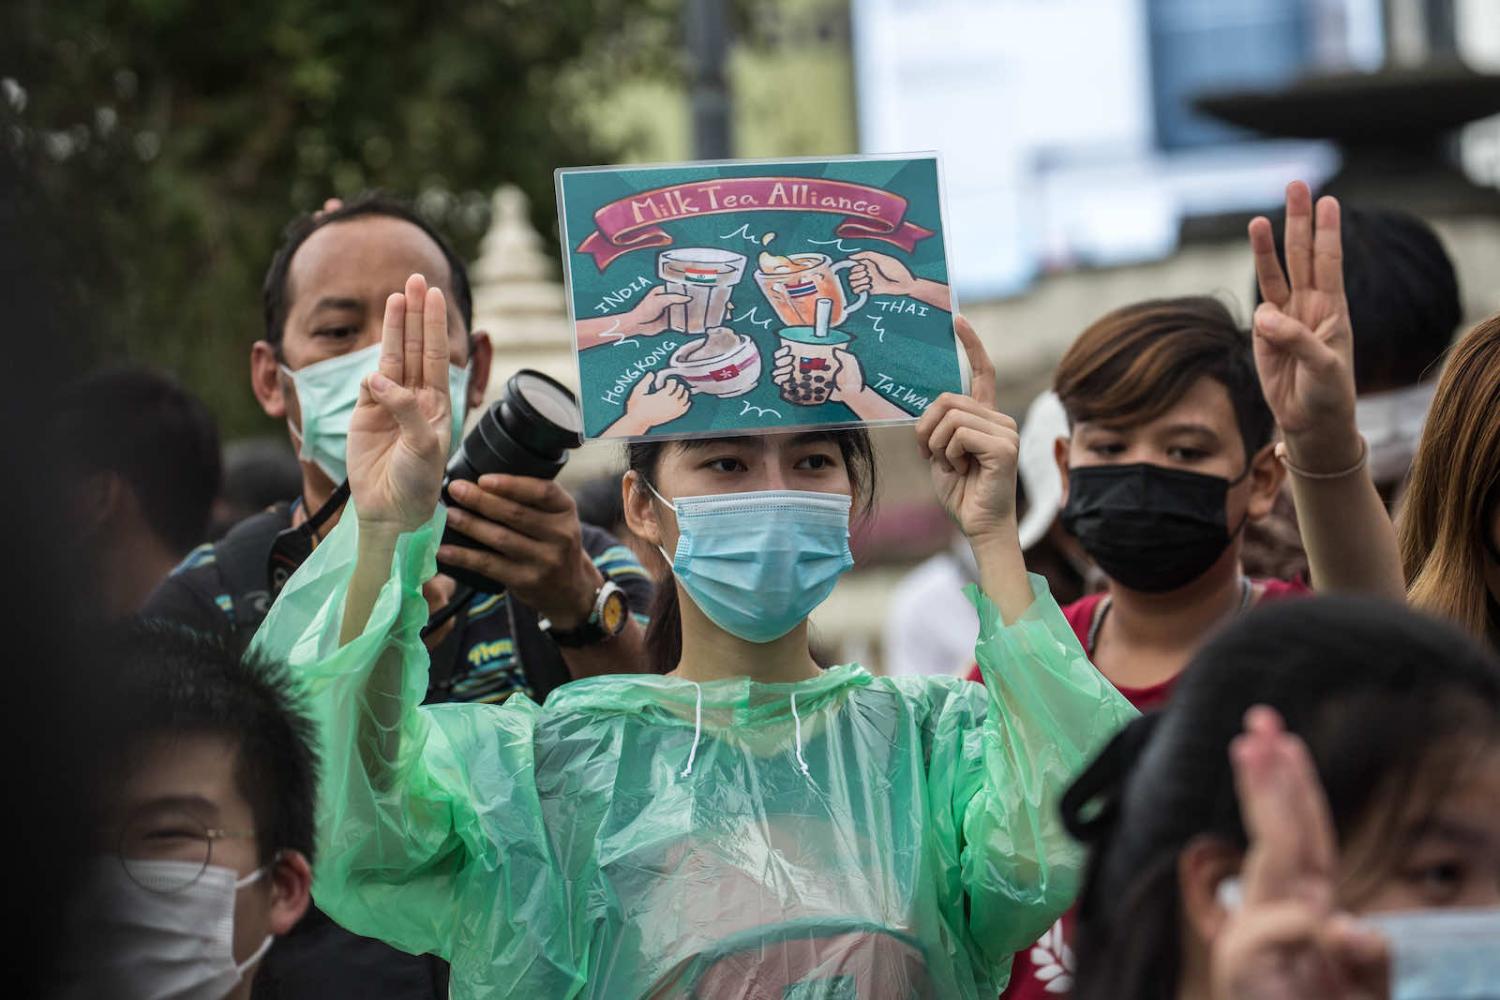 A protester in Bangkok in October, the sign featuring causes spanning Thailand, Taiwan, Hong Kong and India (Geem Drake via Getty Images)